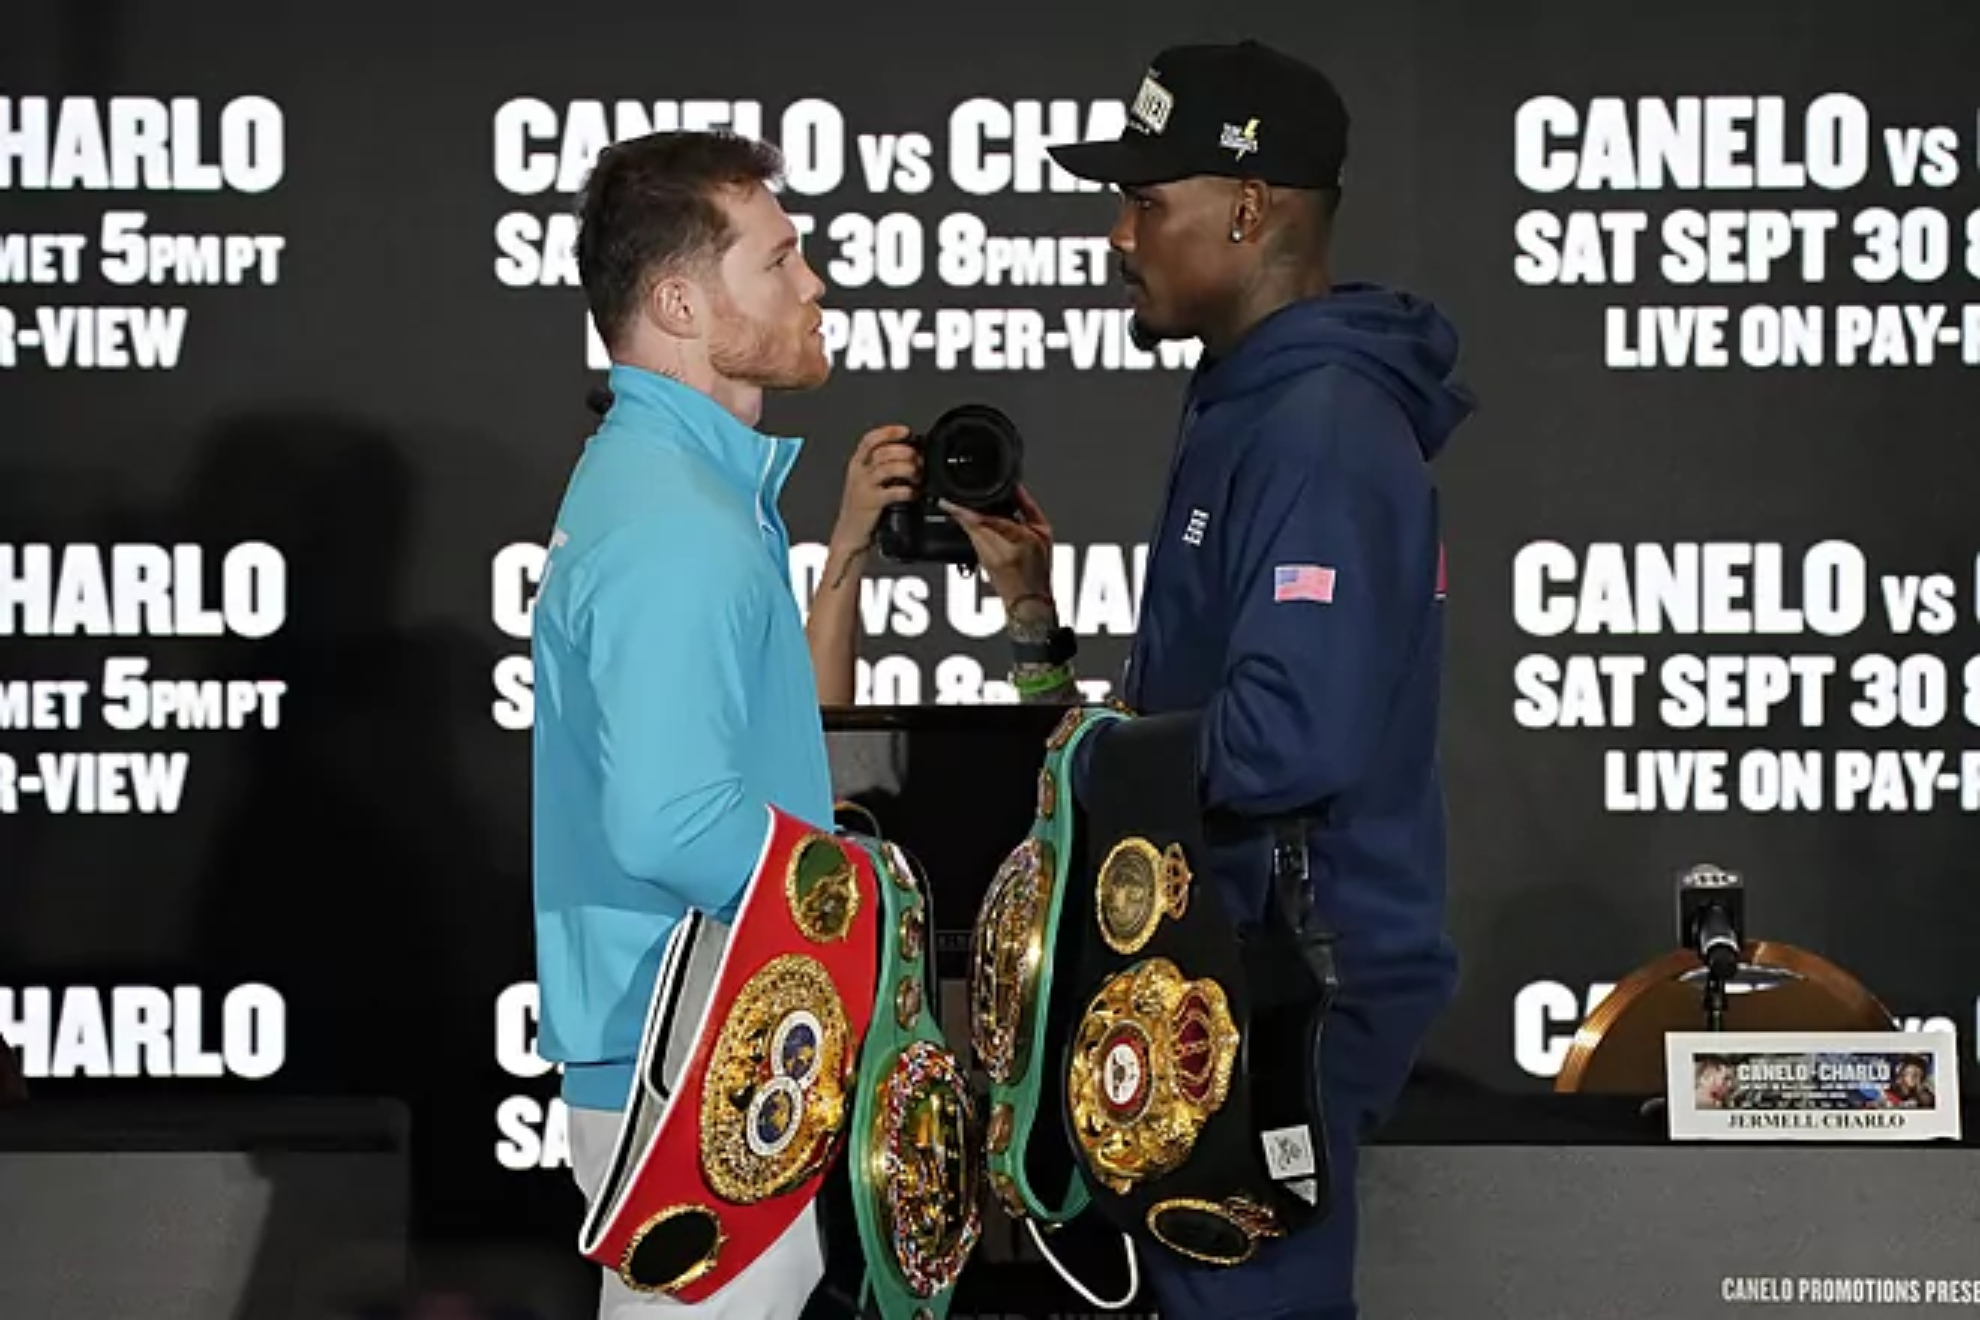 Canelo Alvarez vs. Jermell Charlo face off at weigh-in, teasing an epic Saturday showdown